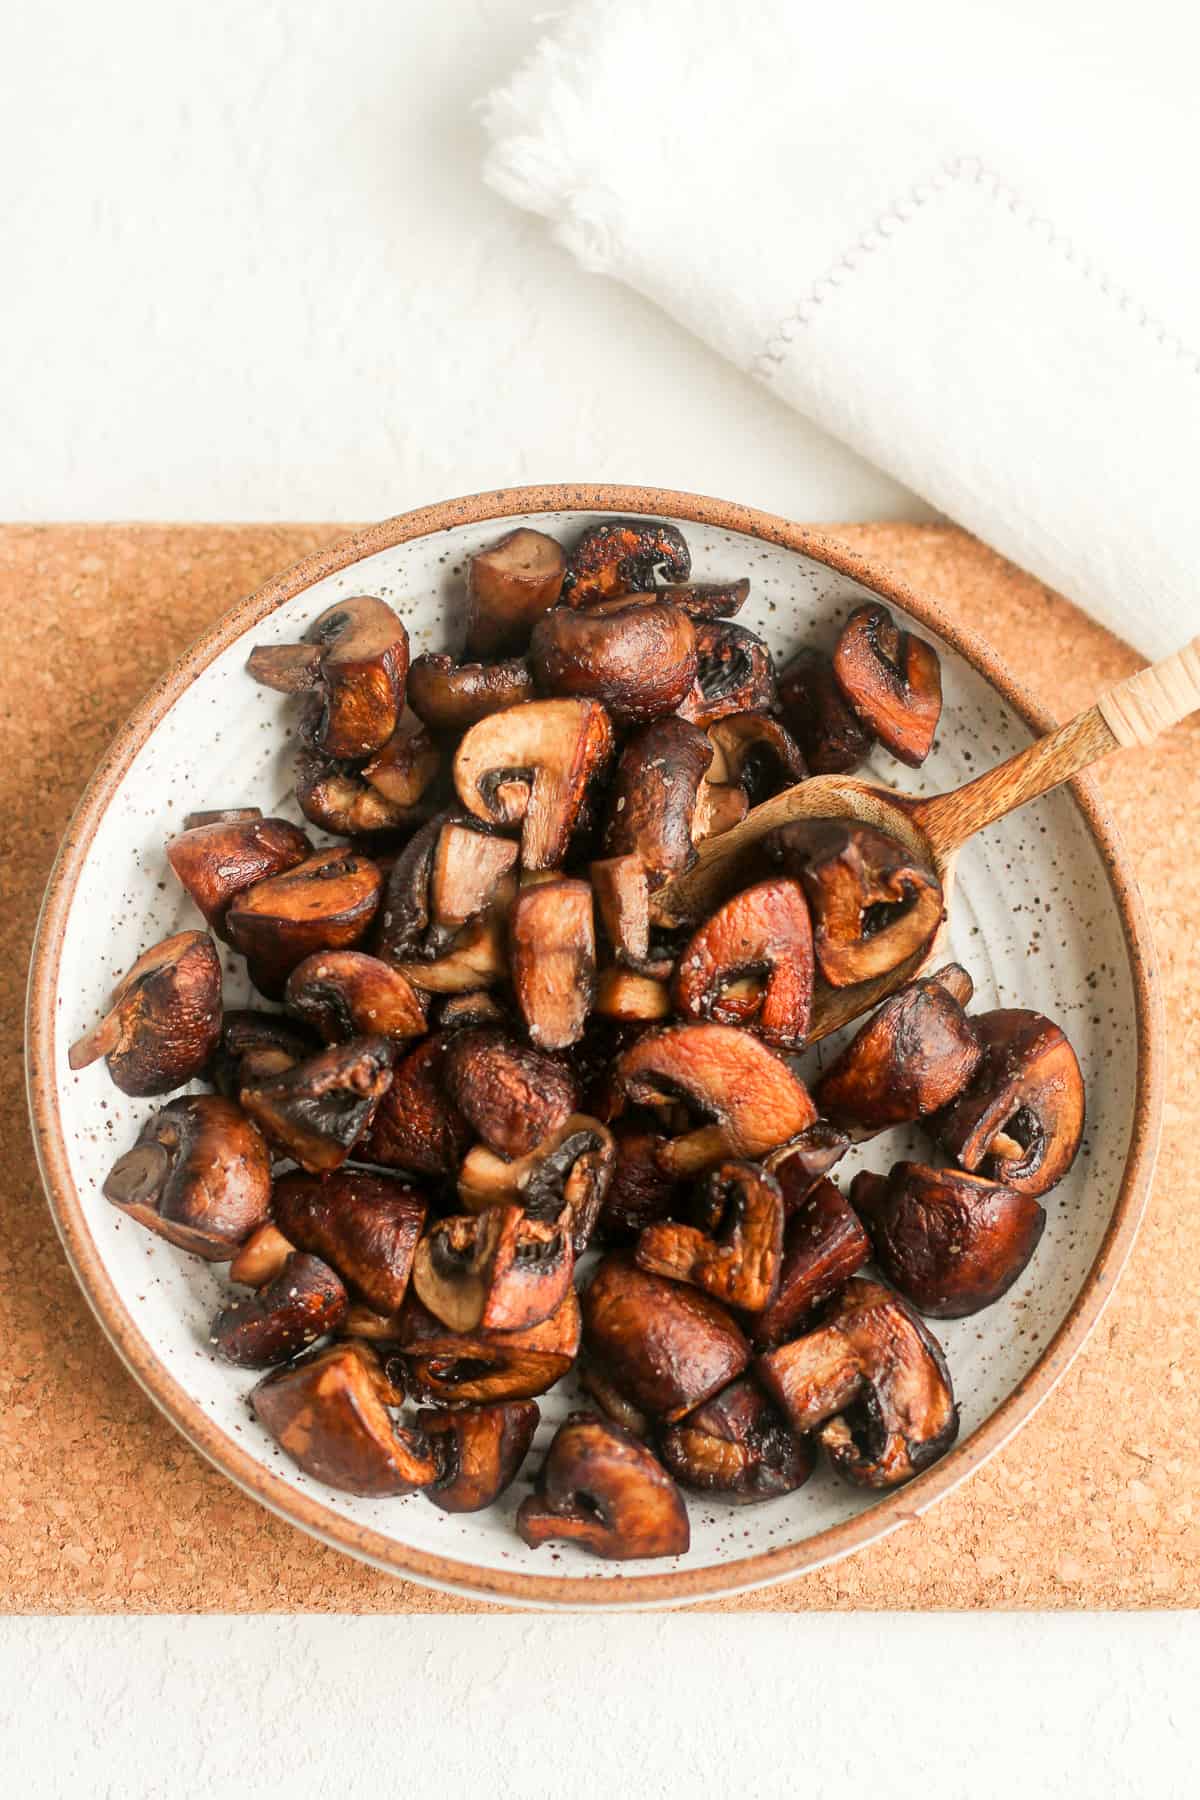 A bowl of browned mushrooms on a wooden board.